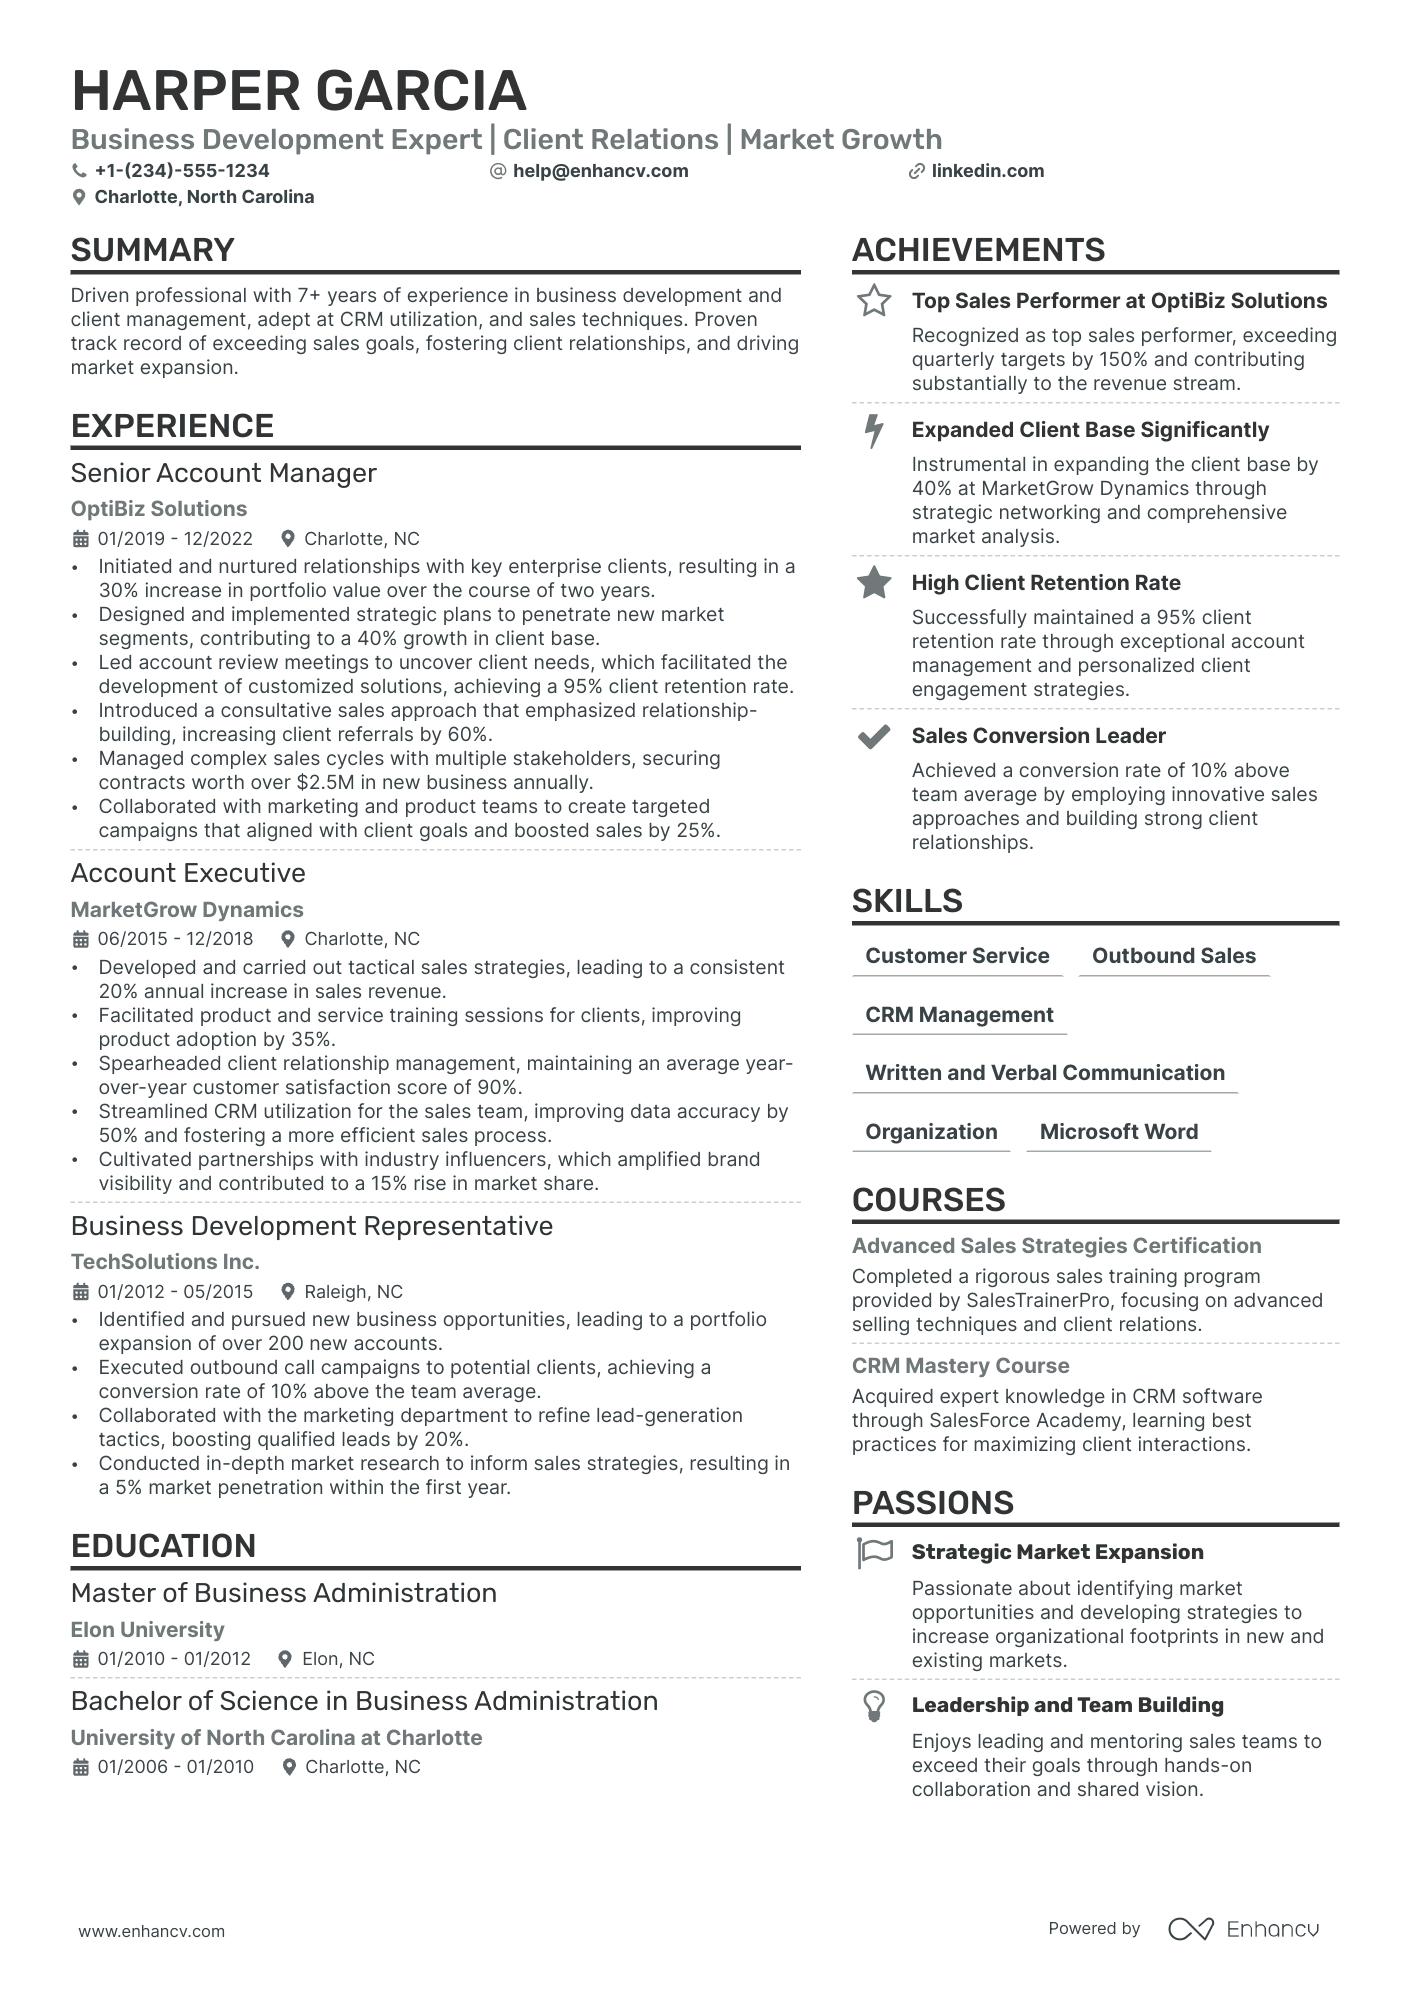 Business Relationship Manager resume example